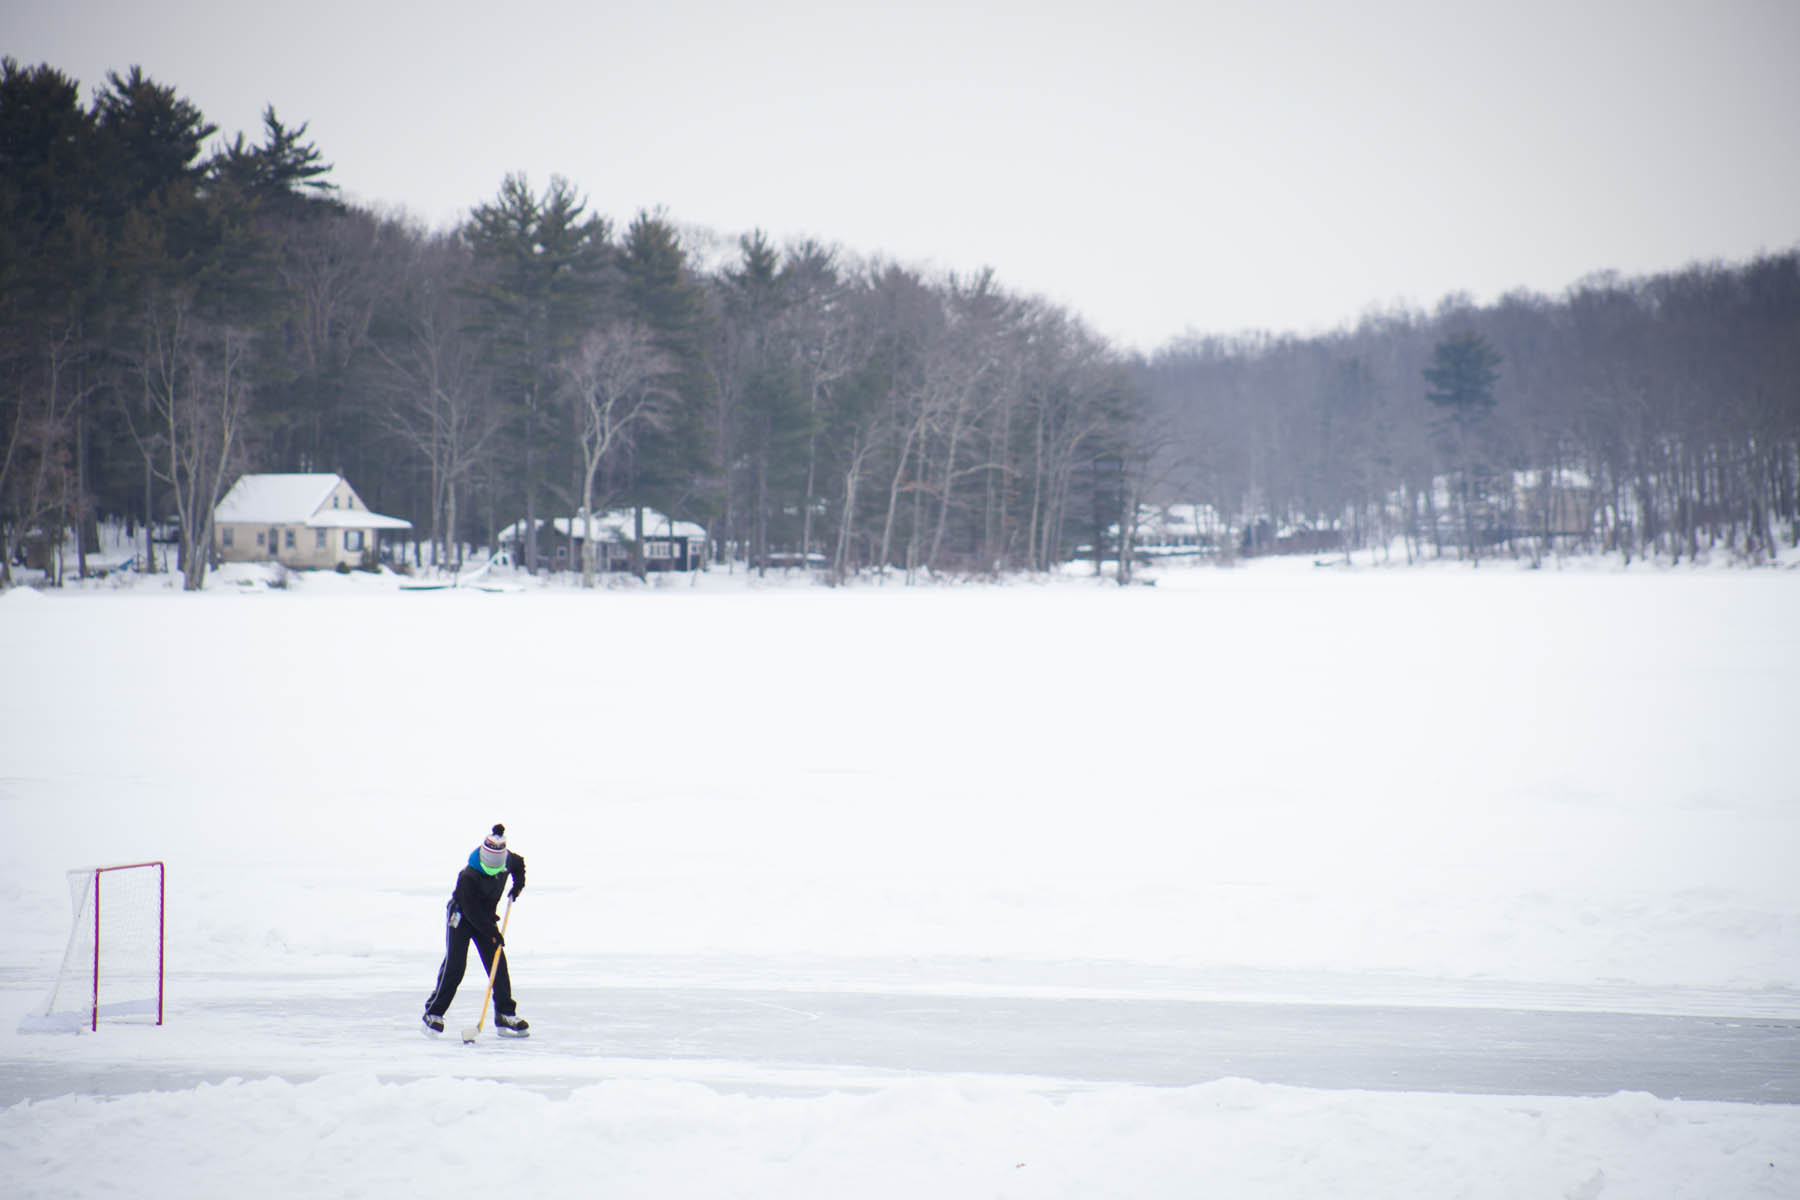 Hockey plater on lake ice in winter.